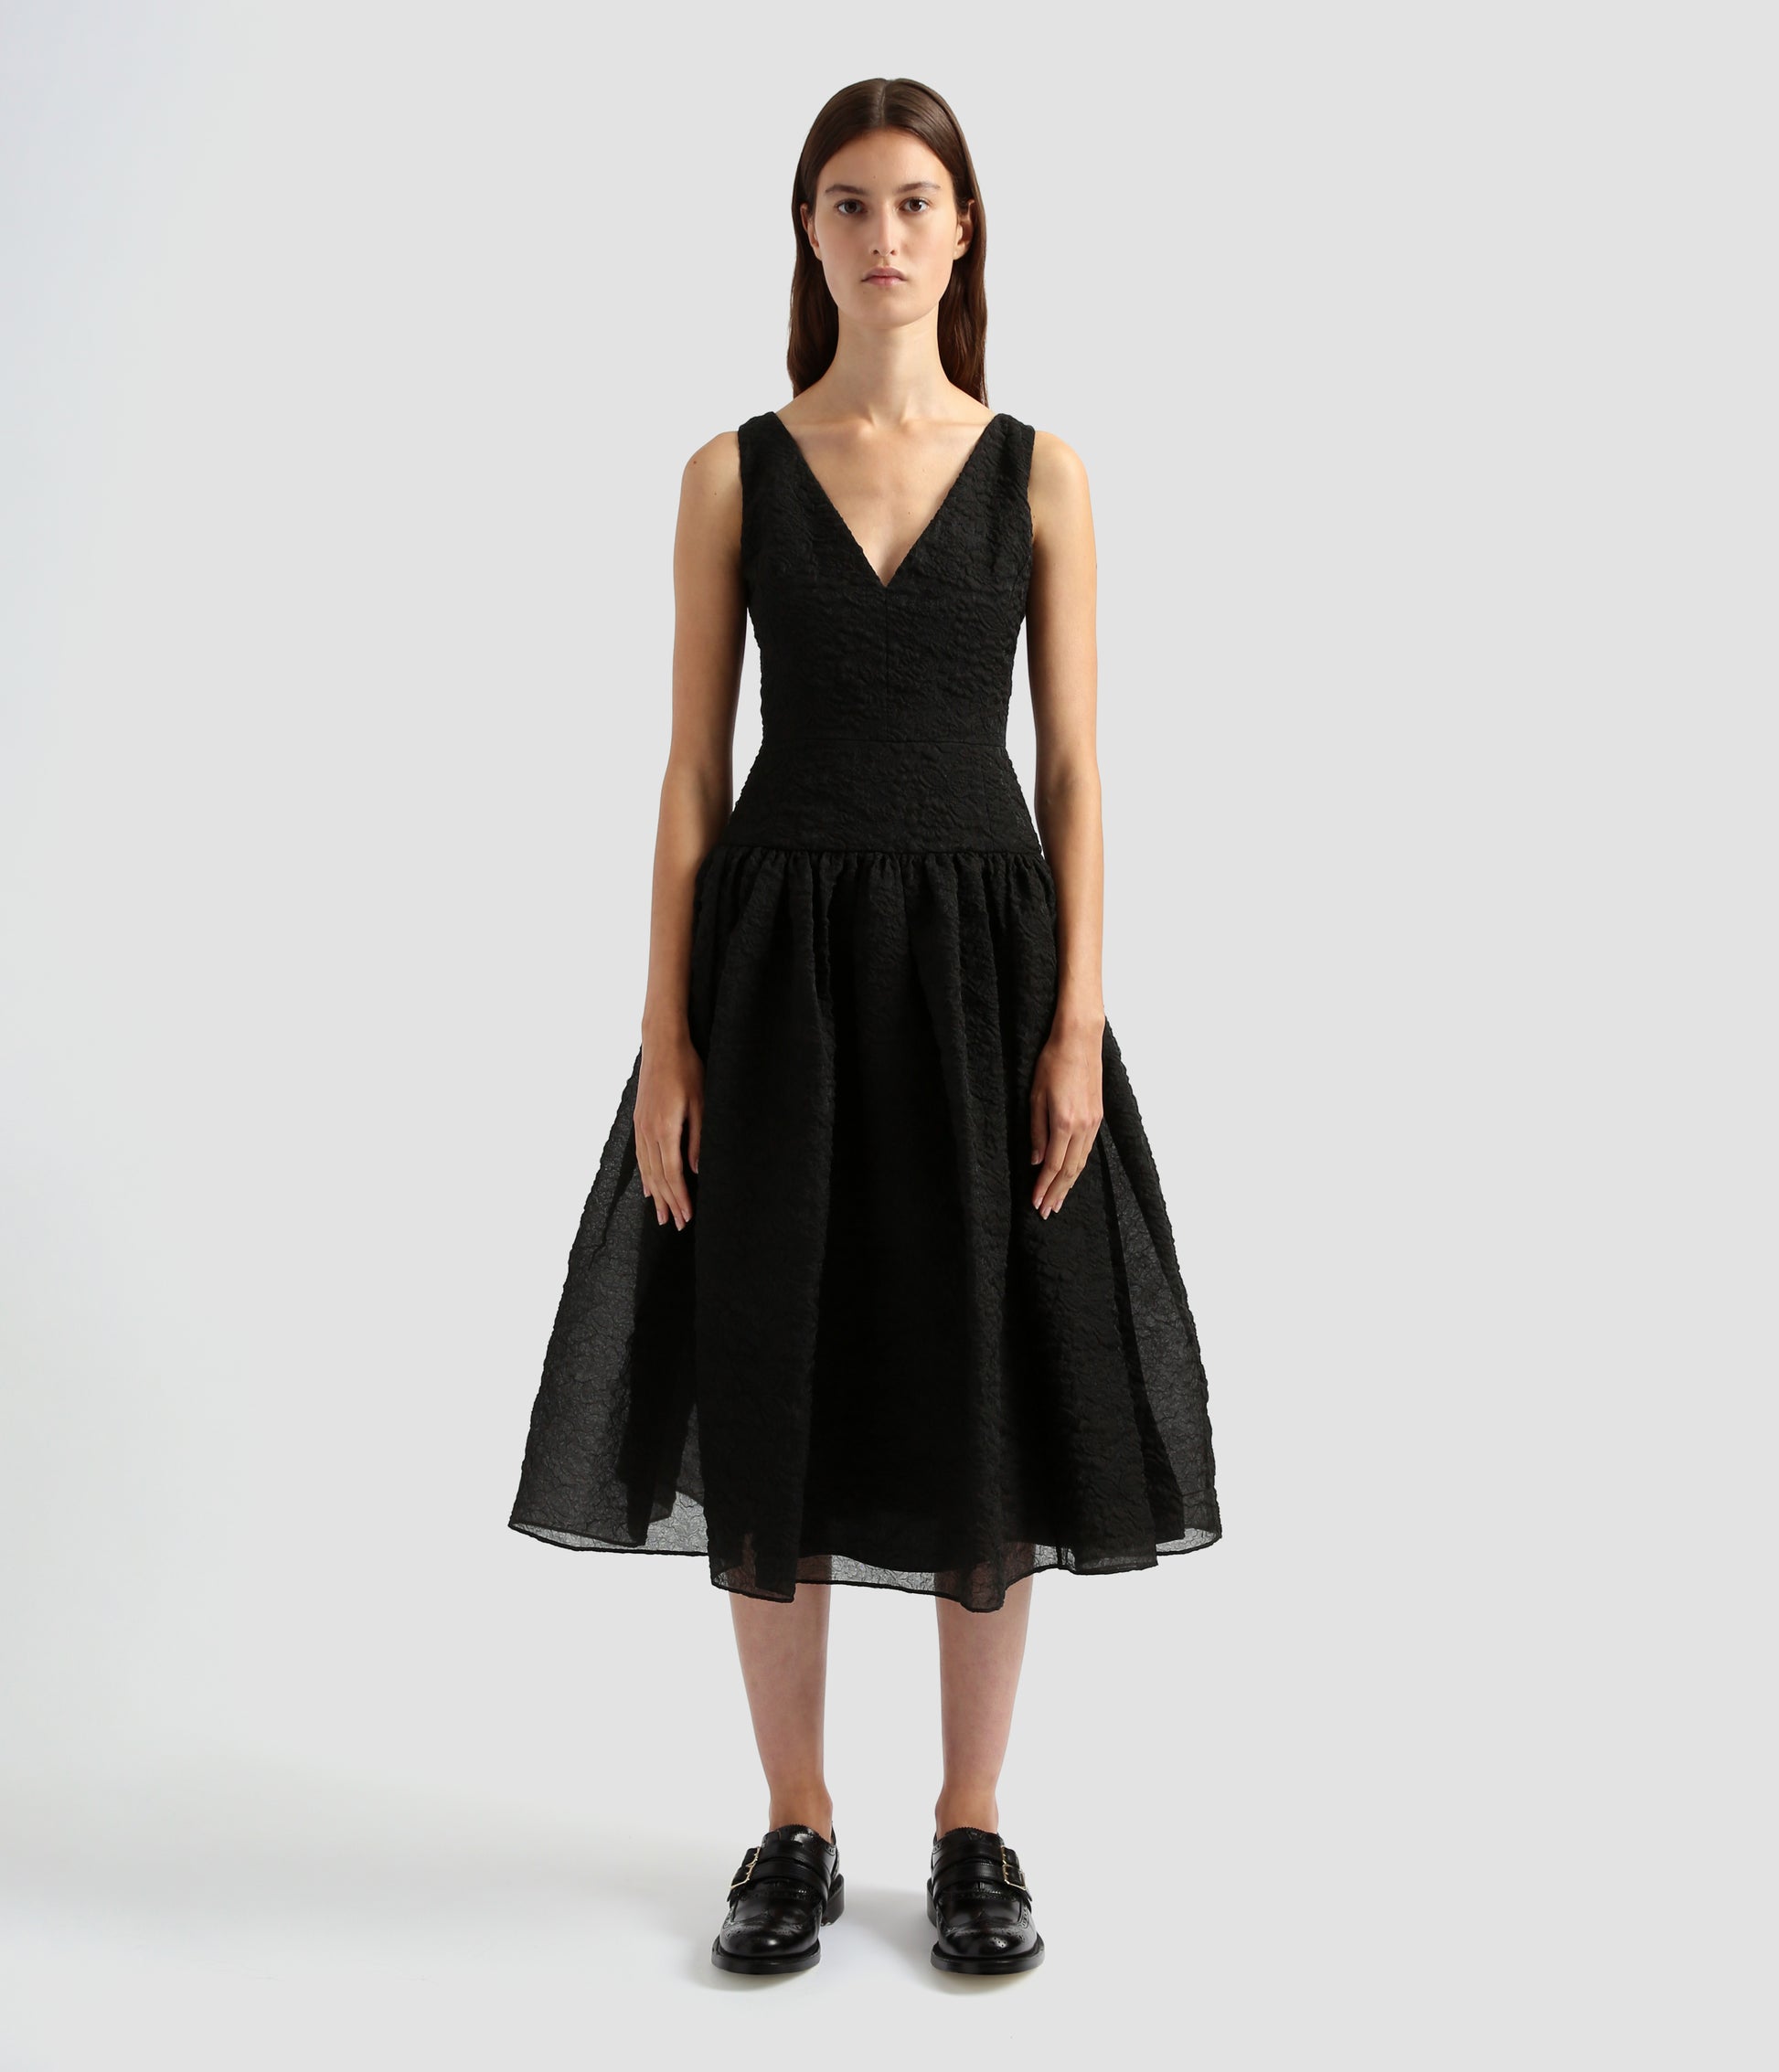 A stunning black organza dress made from black organza cloque with a textured surface. This dress with organza, is sleeveless with a cinched waist, full skirt and low v-neckline. 